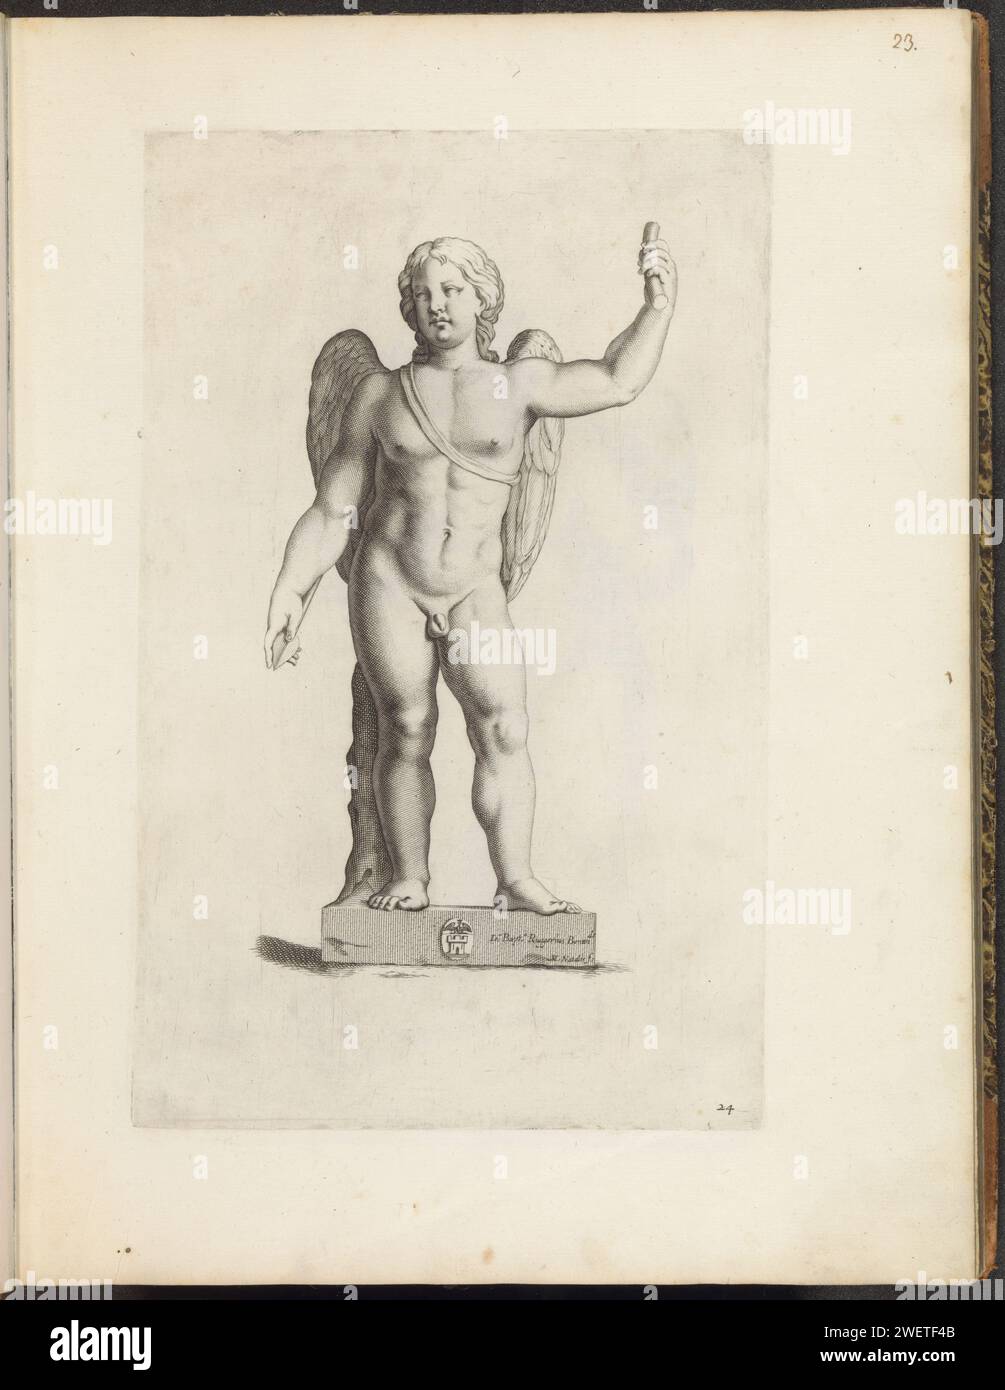 Statue of Amor, 1636 - 1647 print Statue of winged Amor, an arrow in his right hand, in his left hand an excerpt of an arc. On the base the coat of arms of Vincenzo Giustiniani. Print is part of an album with a series of prints to the sculptures in the collection in the Galleria Giustiniani in Rome.  paper engraving (story of) Cupid, Amor (Eros). attributes of Cupid: arrow(s). piece of sculpture, reproduction of a piece of sculpture Stock Photo